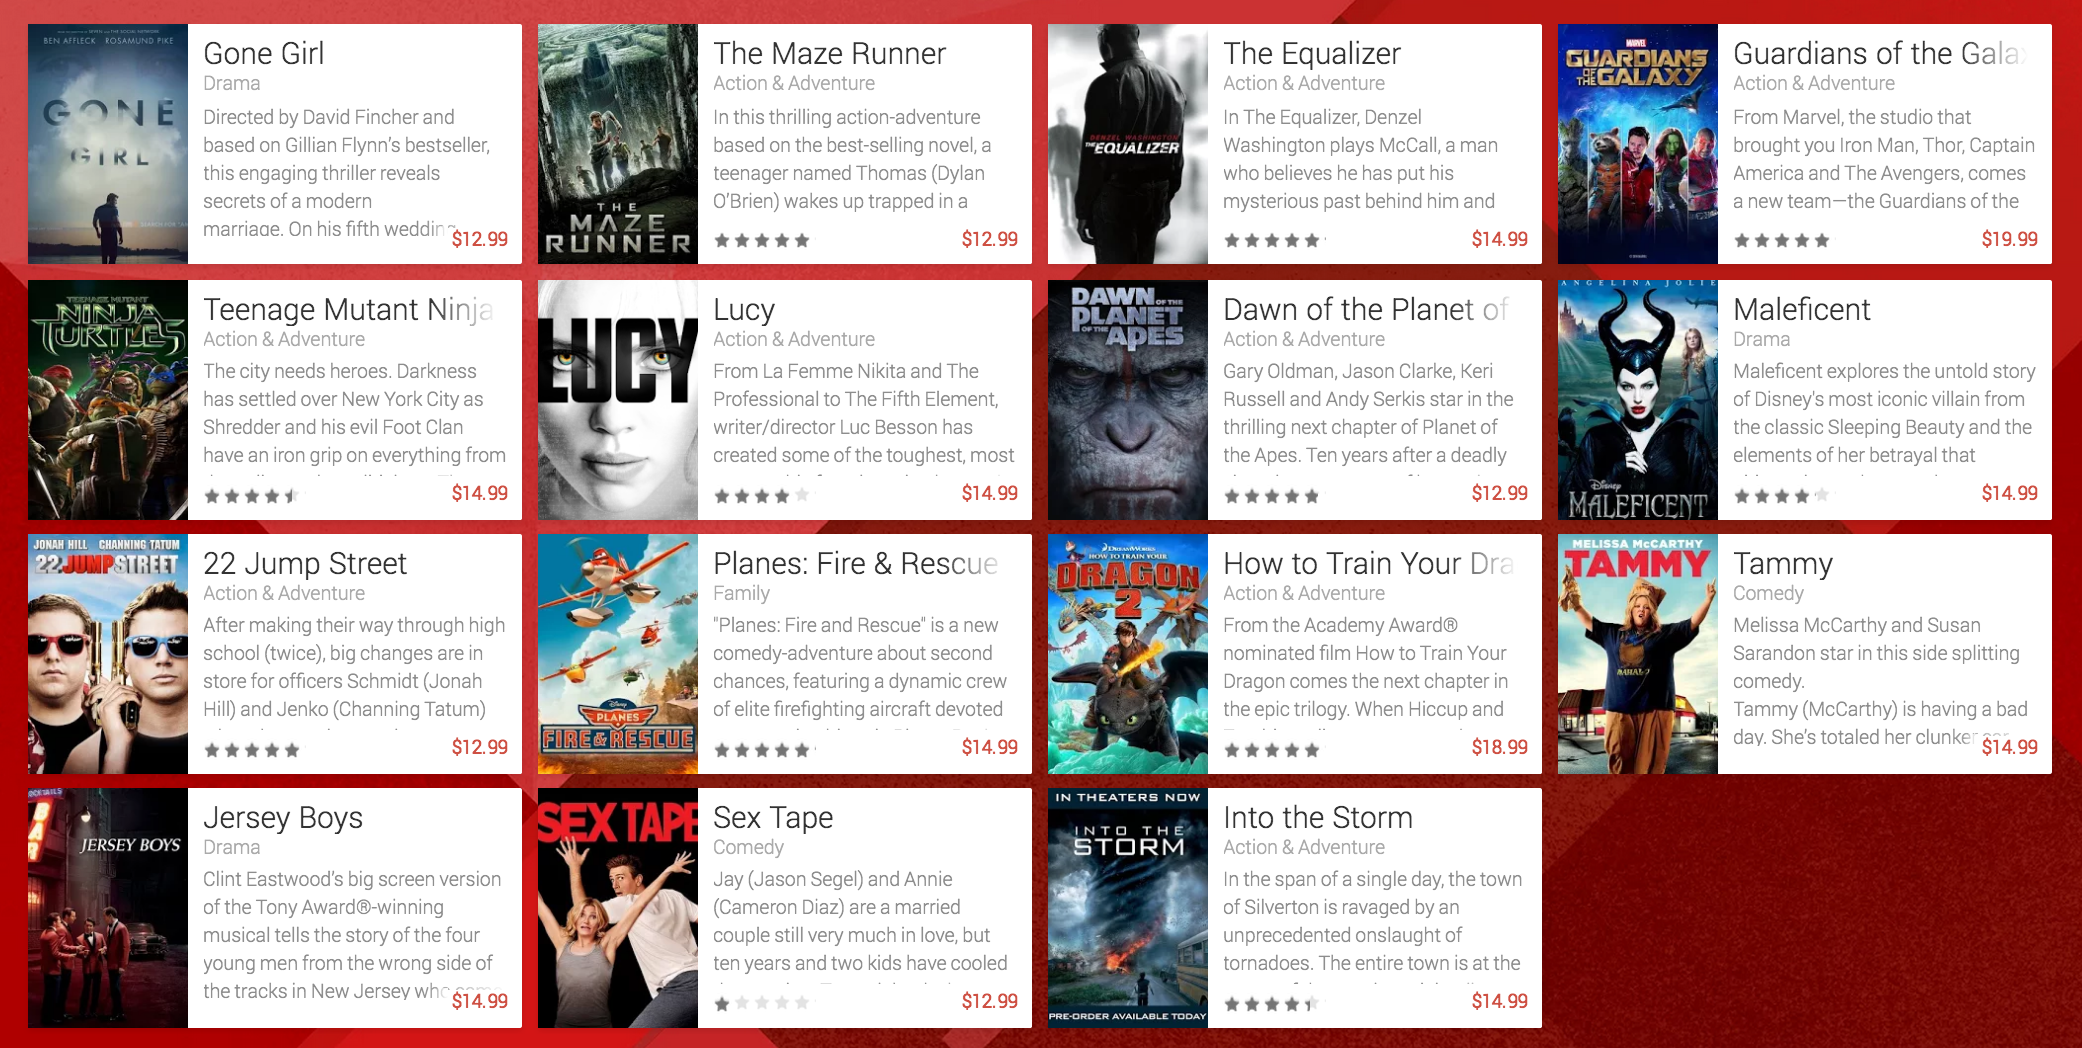 What Men Want - Movies on Google Play